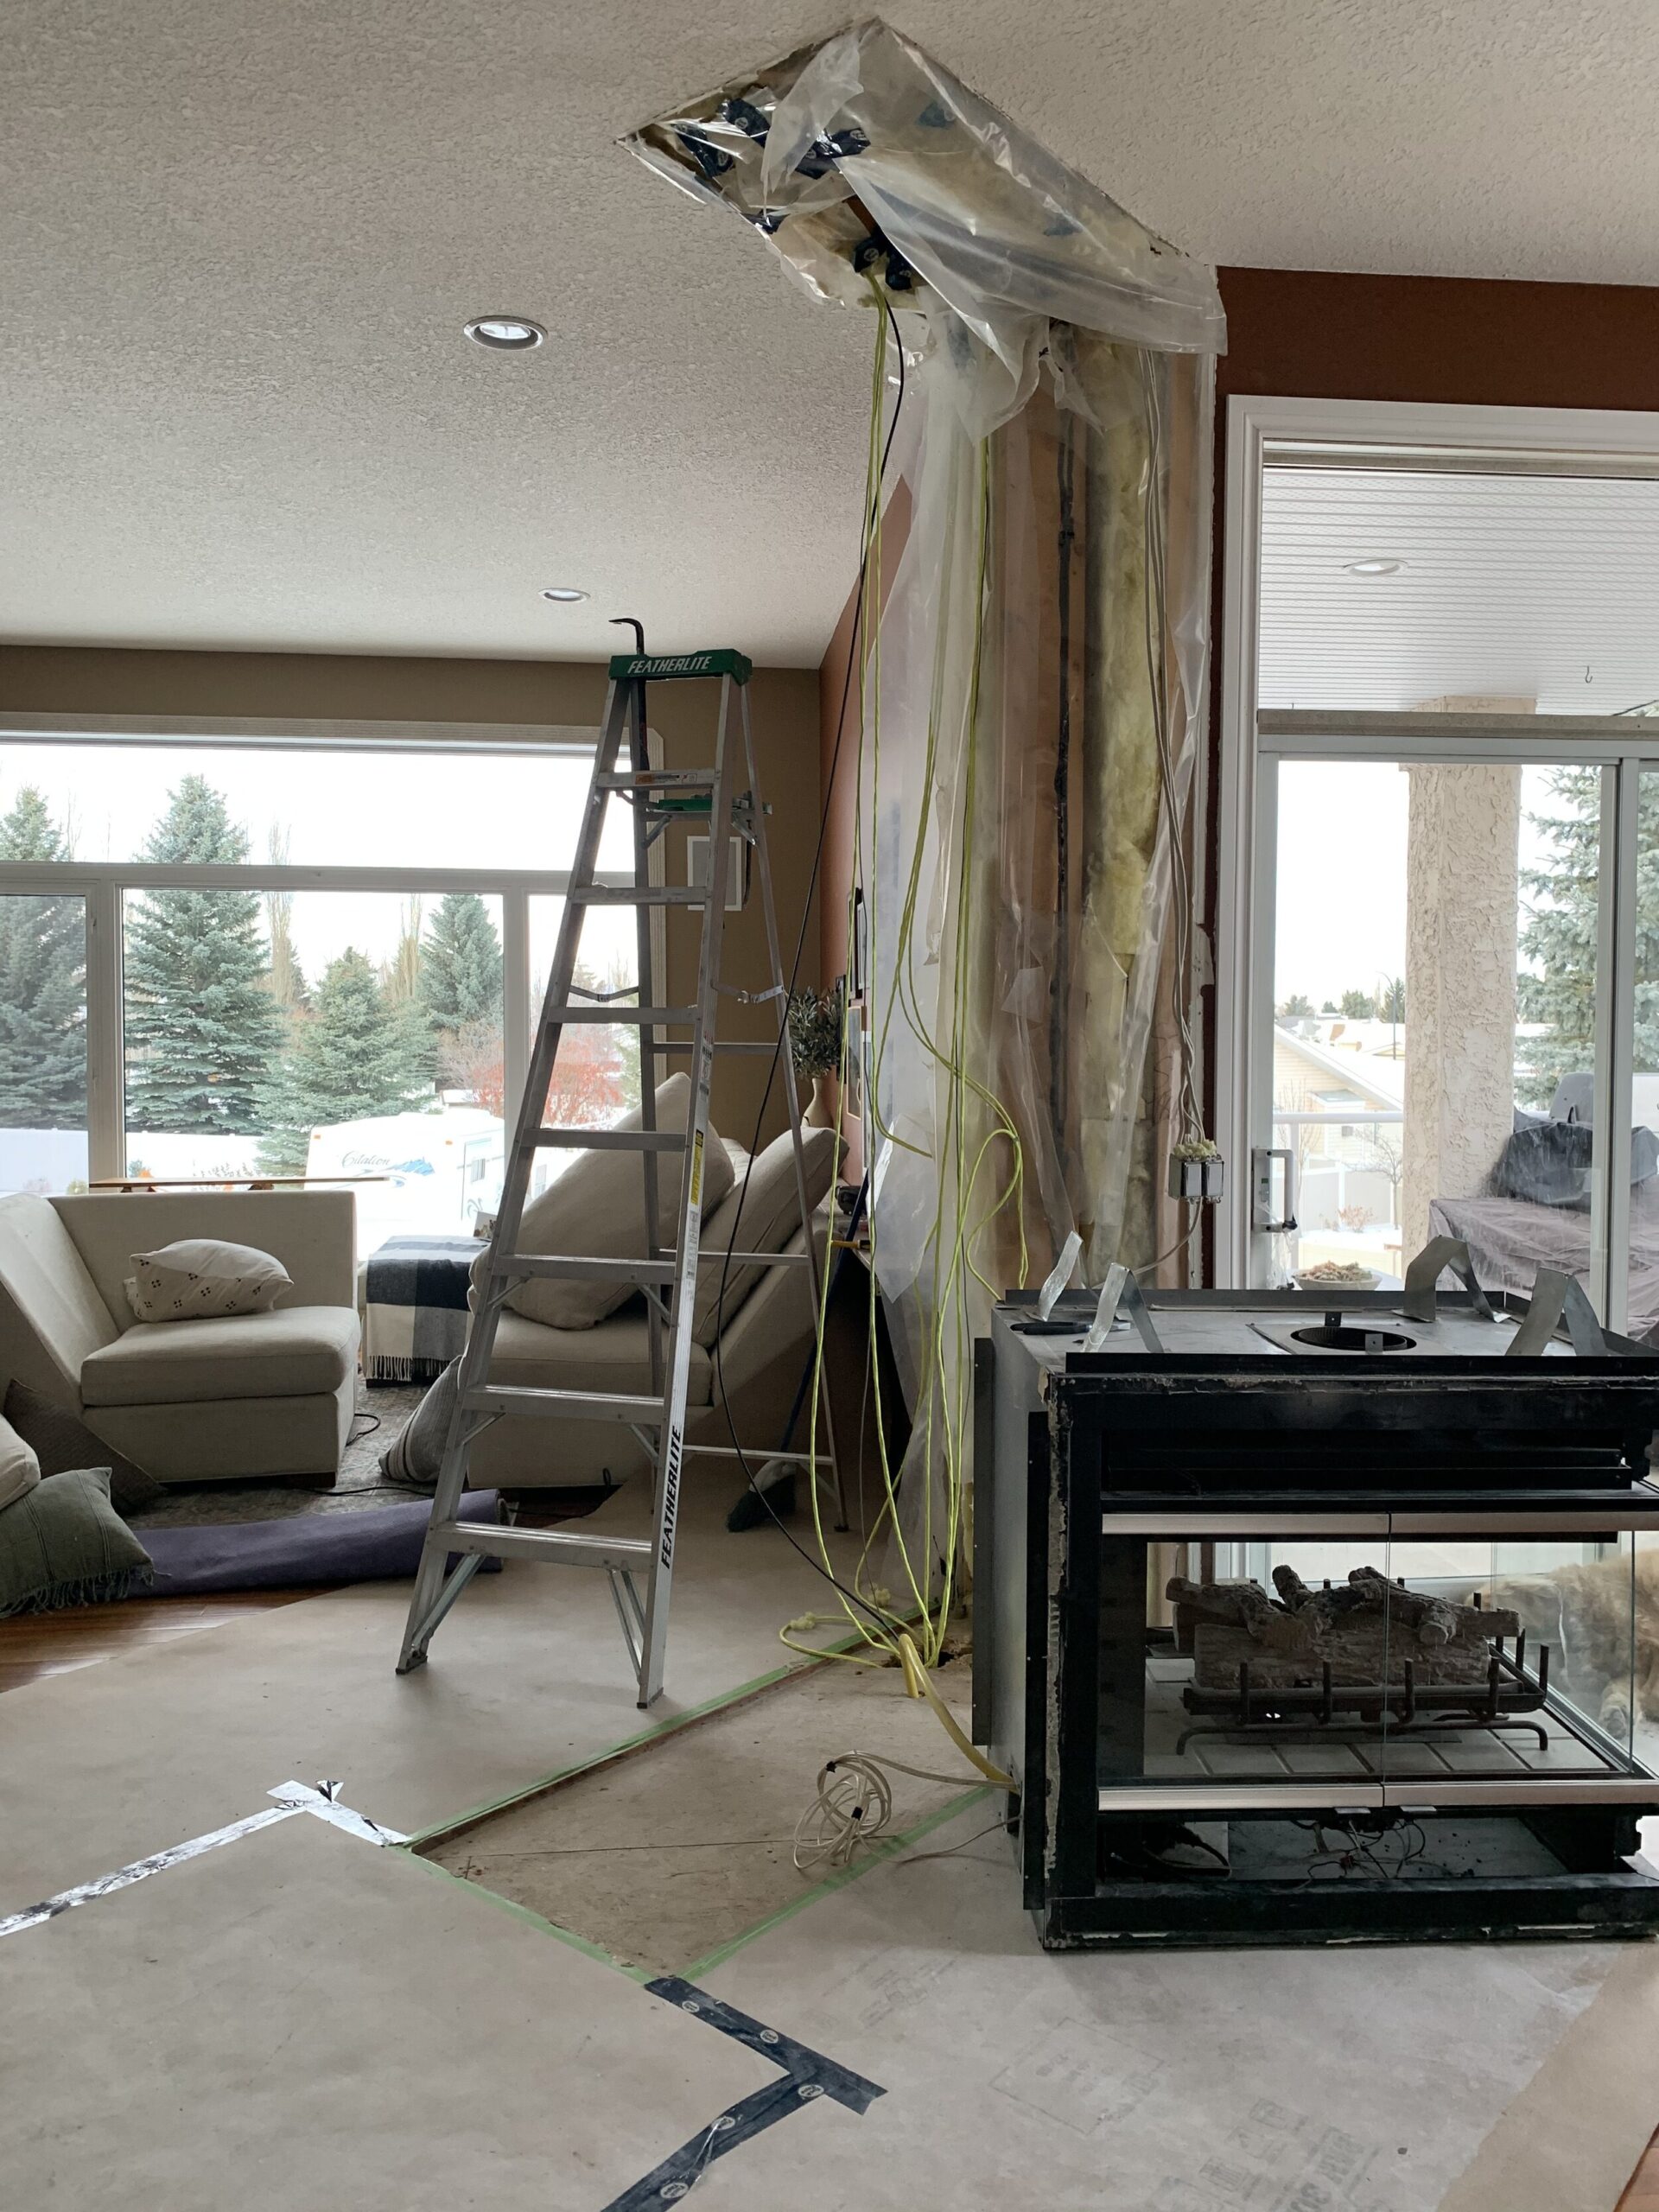 Fireplace removed and wires and drywall hanging